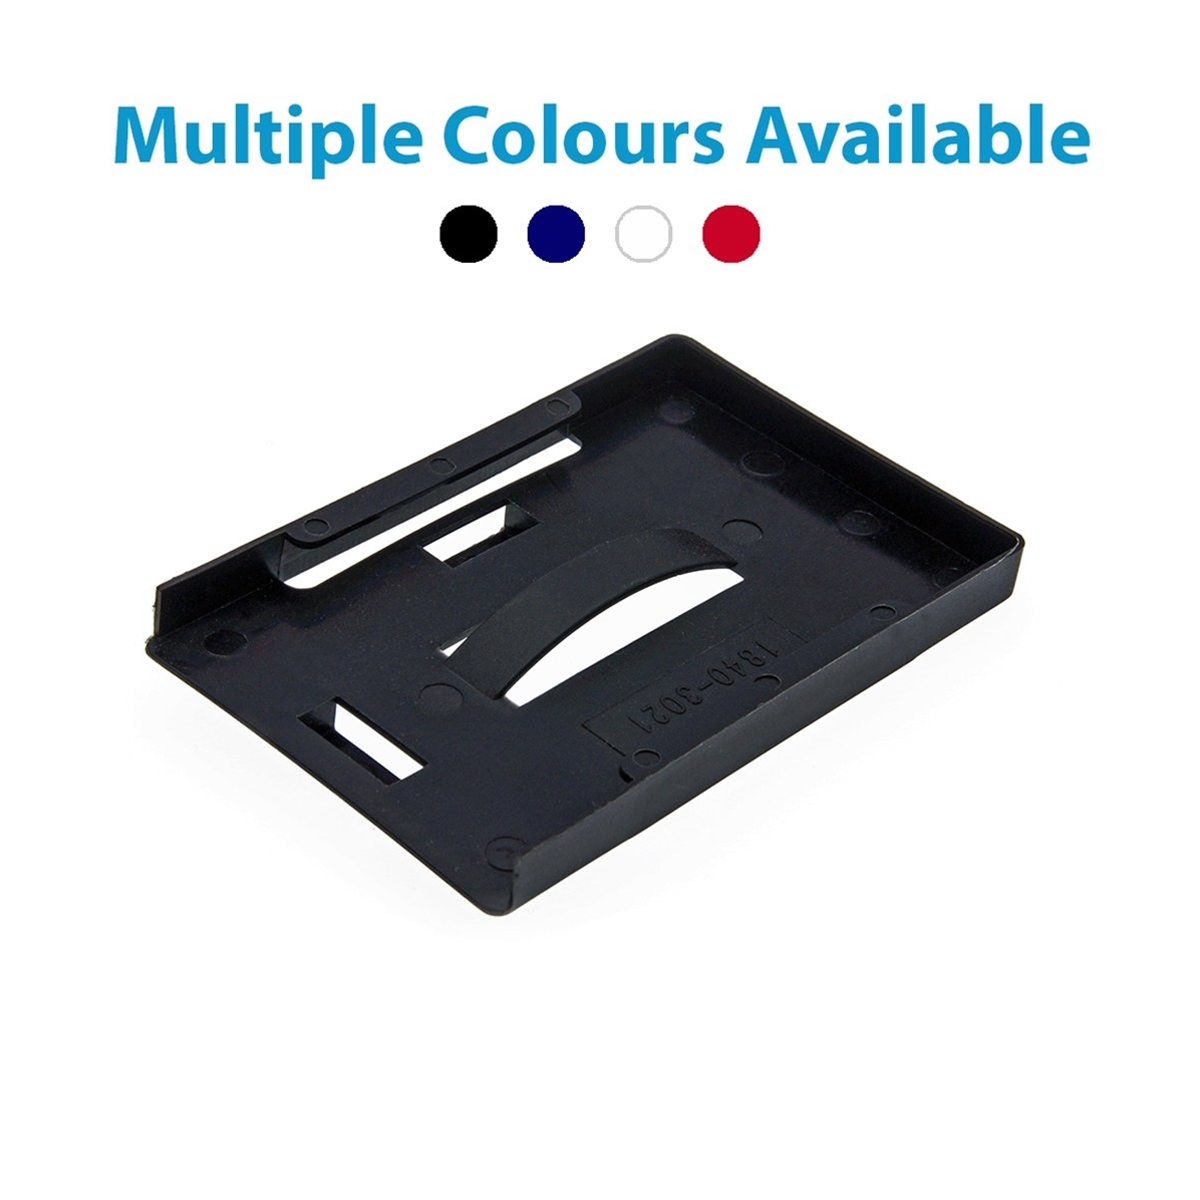 black multi id card holder showing multiple colours available